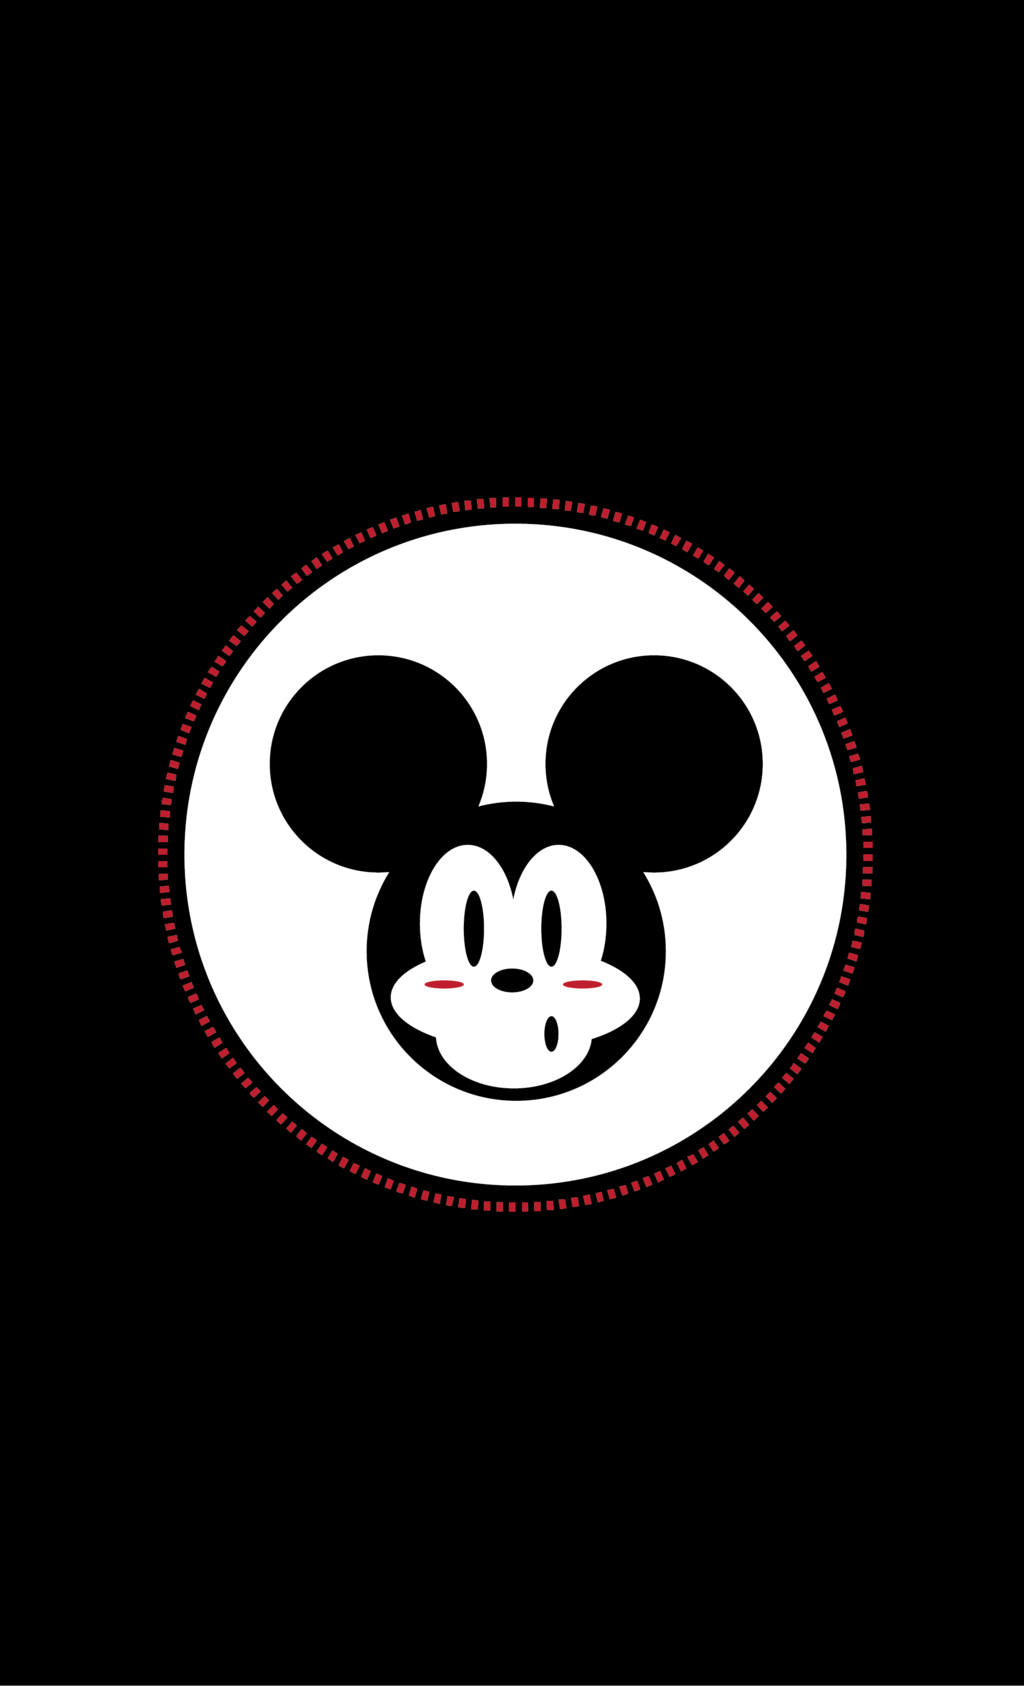 Black Mickey Mouse Wallpaper Hd - A1 Wallpaperz For You